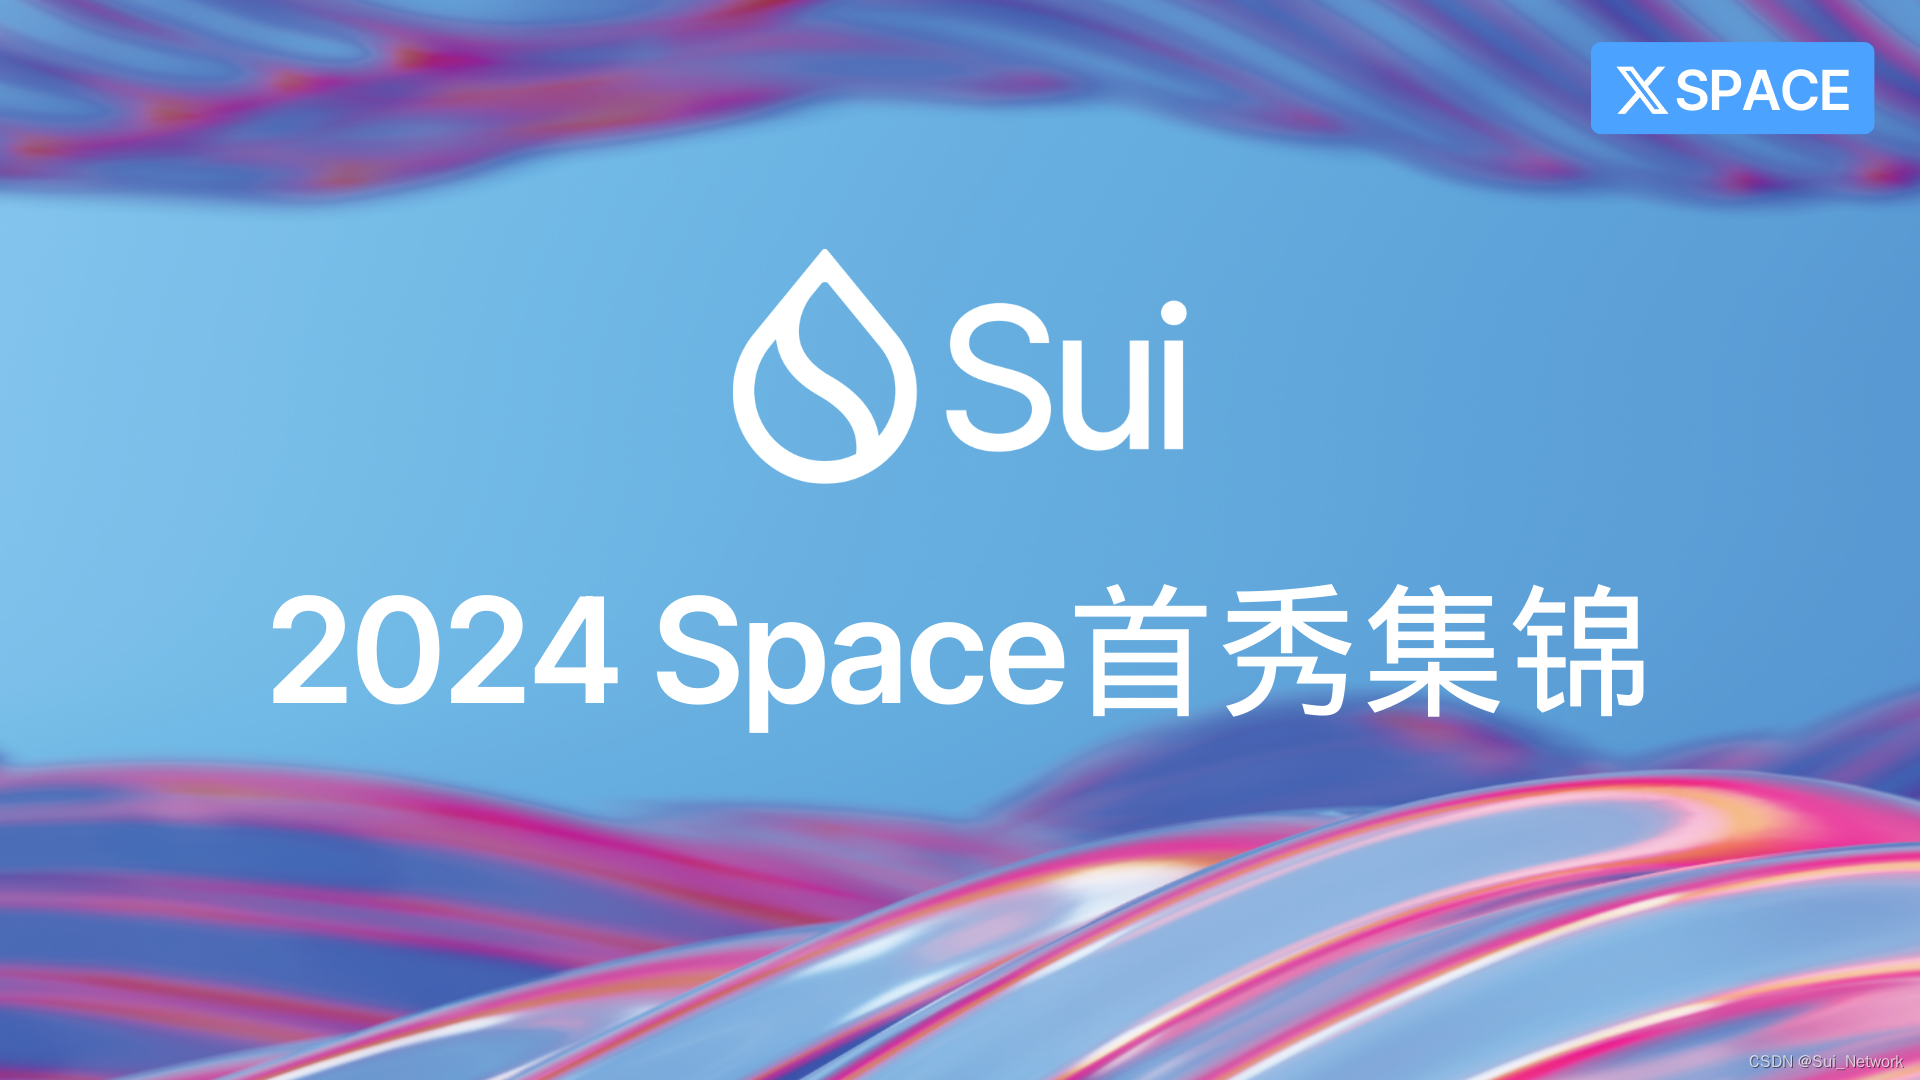 Sui 2024 Space首秀精彩集锦